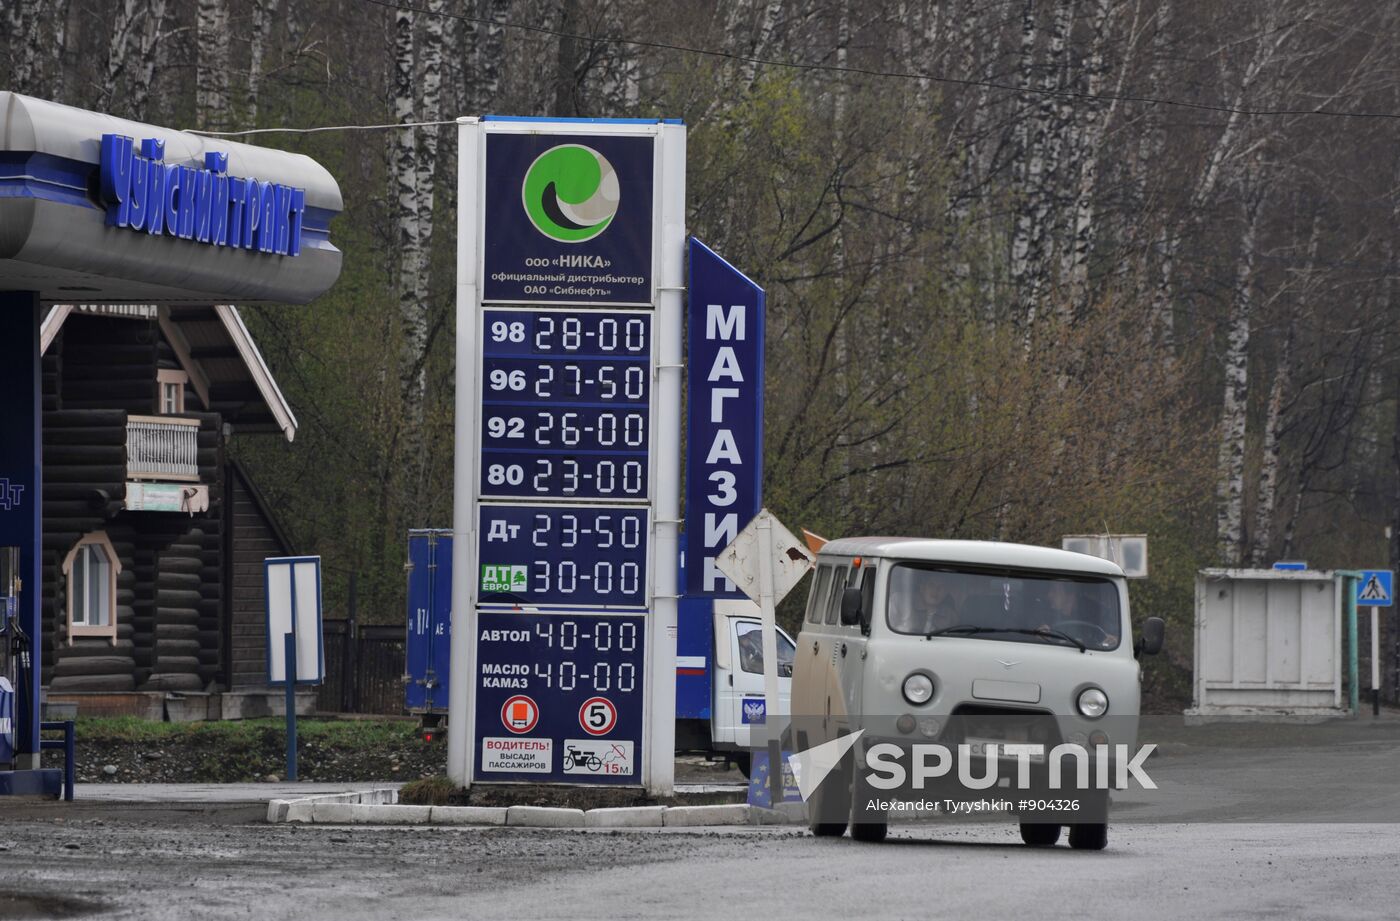 Fuel staions in Russia's regions